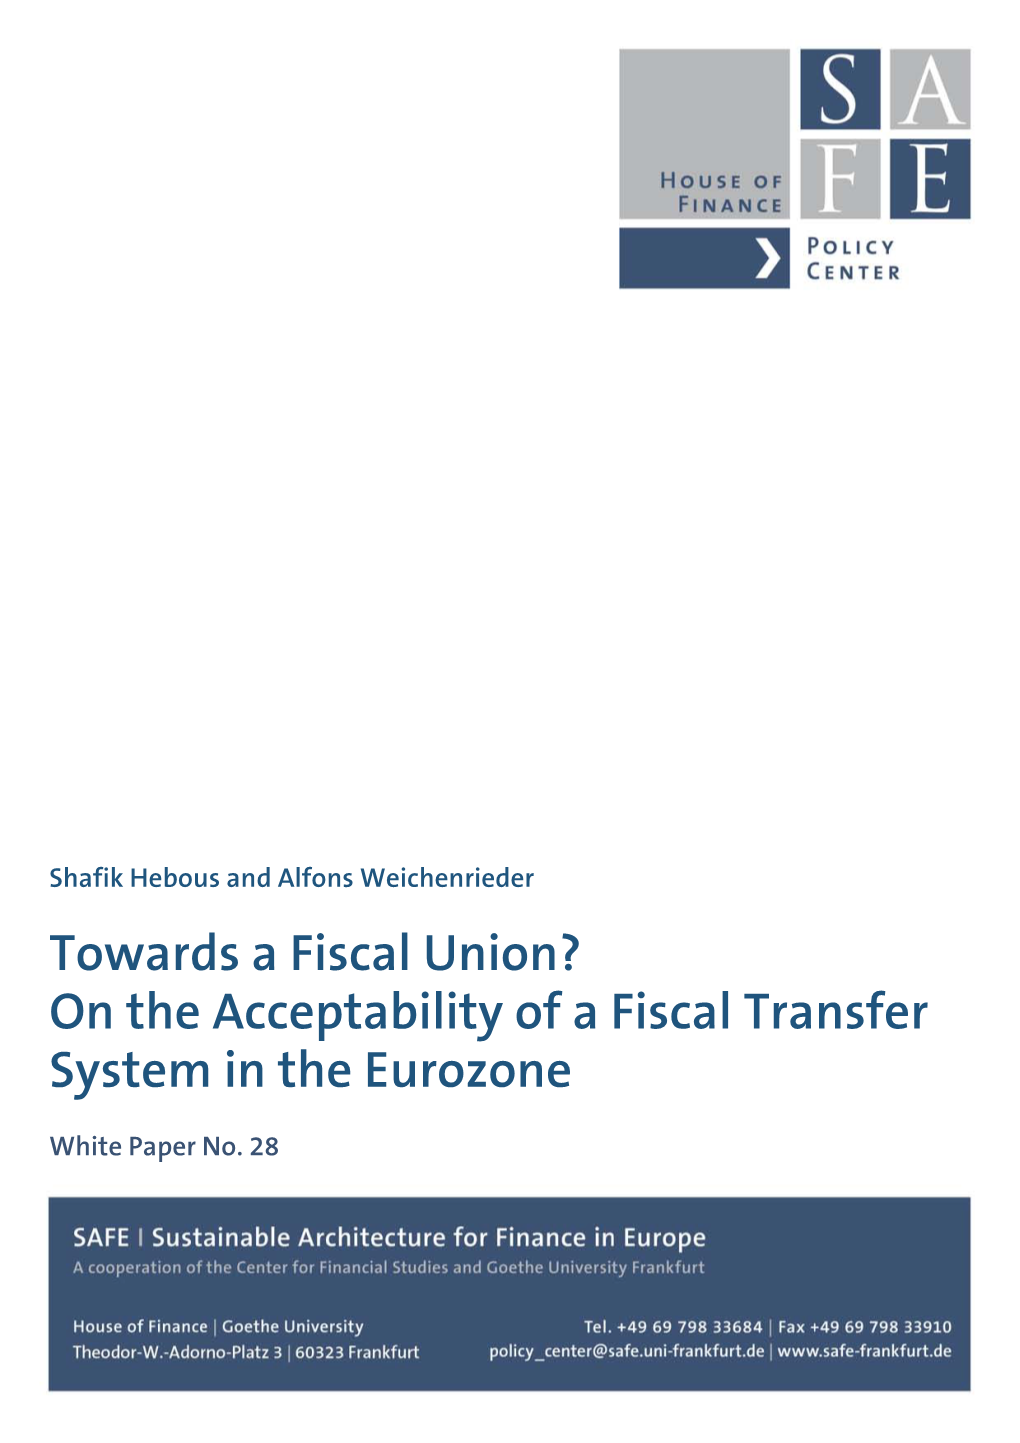 On the Acceptability of a Fiscal Transfer System in the Eurozone